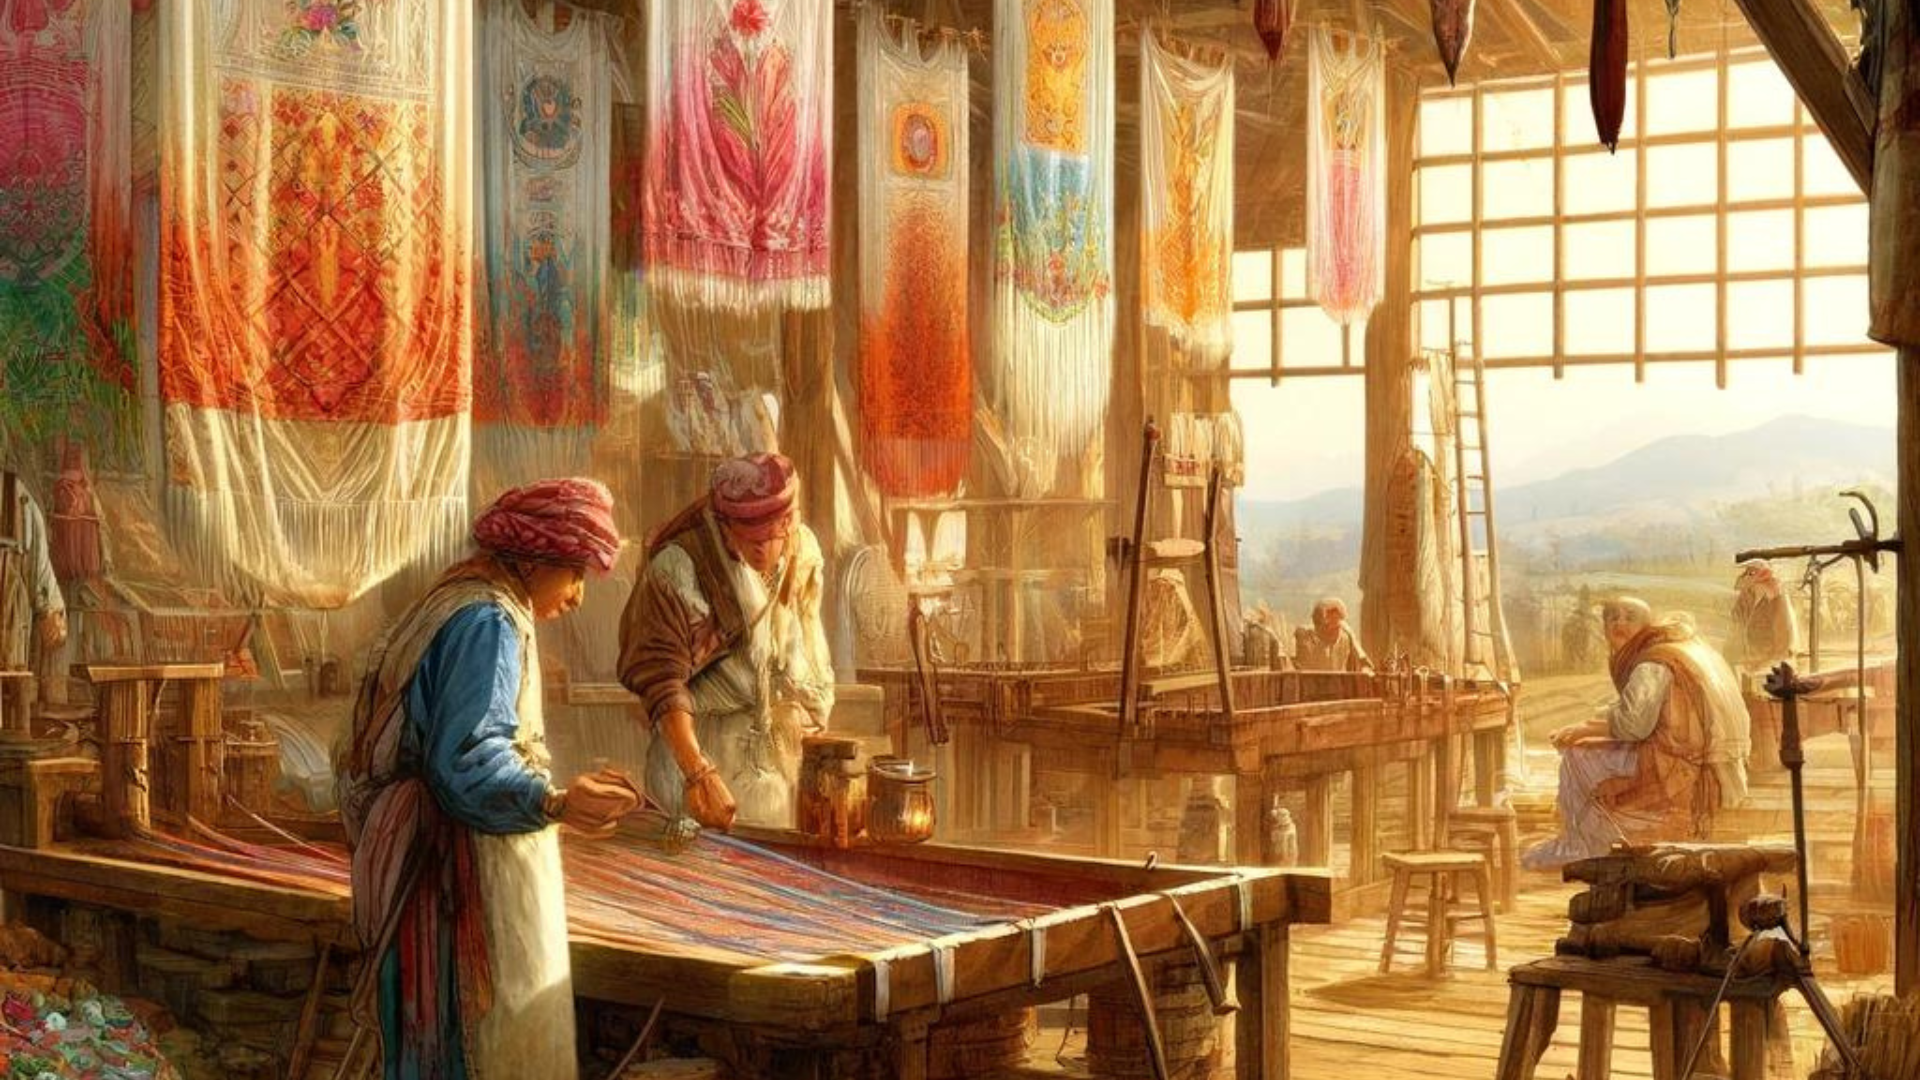 An illustration depicting the traditional process of using natural dyes in tapestry making, featuring artisans applying vibrant dyes to threads, with partially completed tapestries in the background.